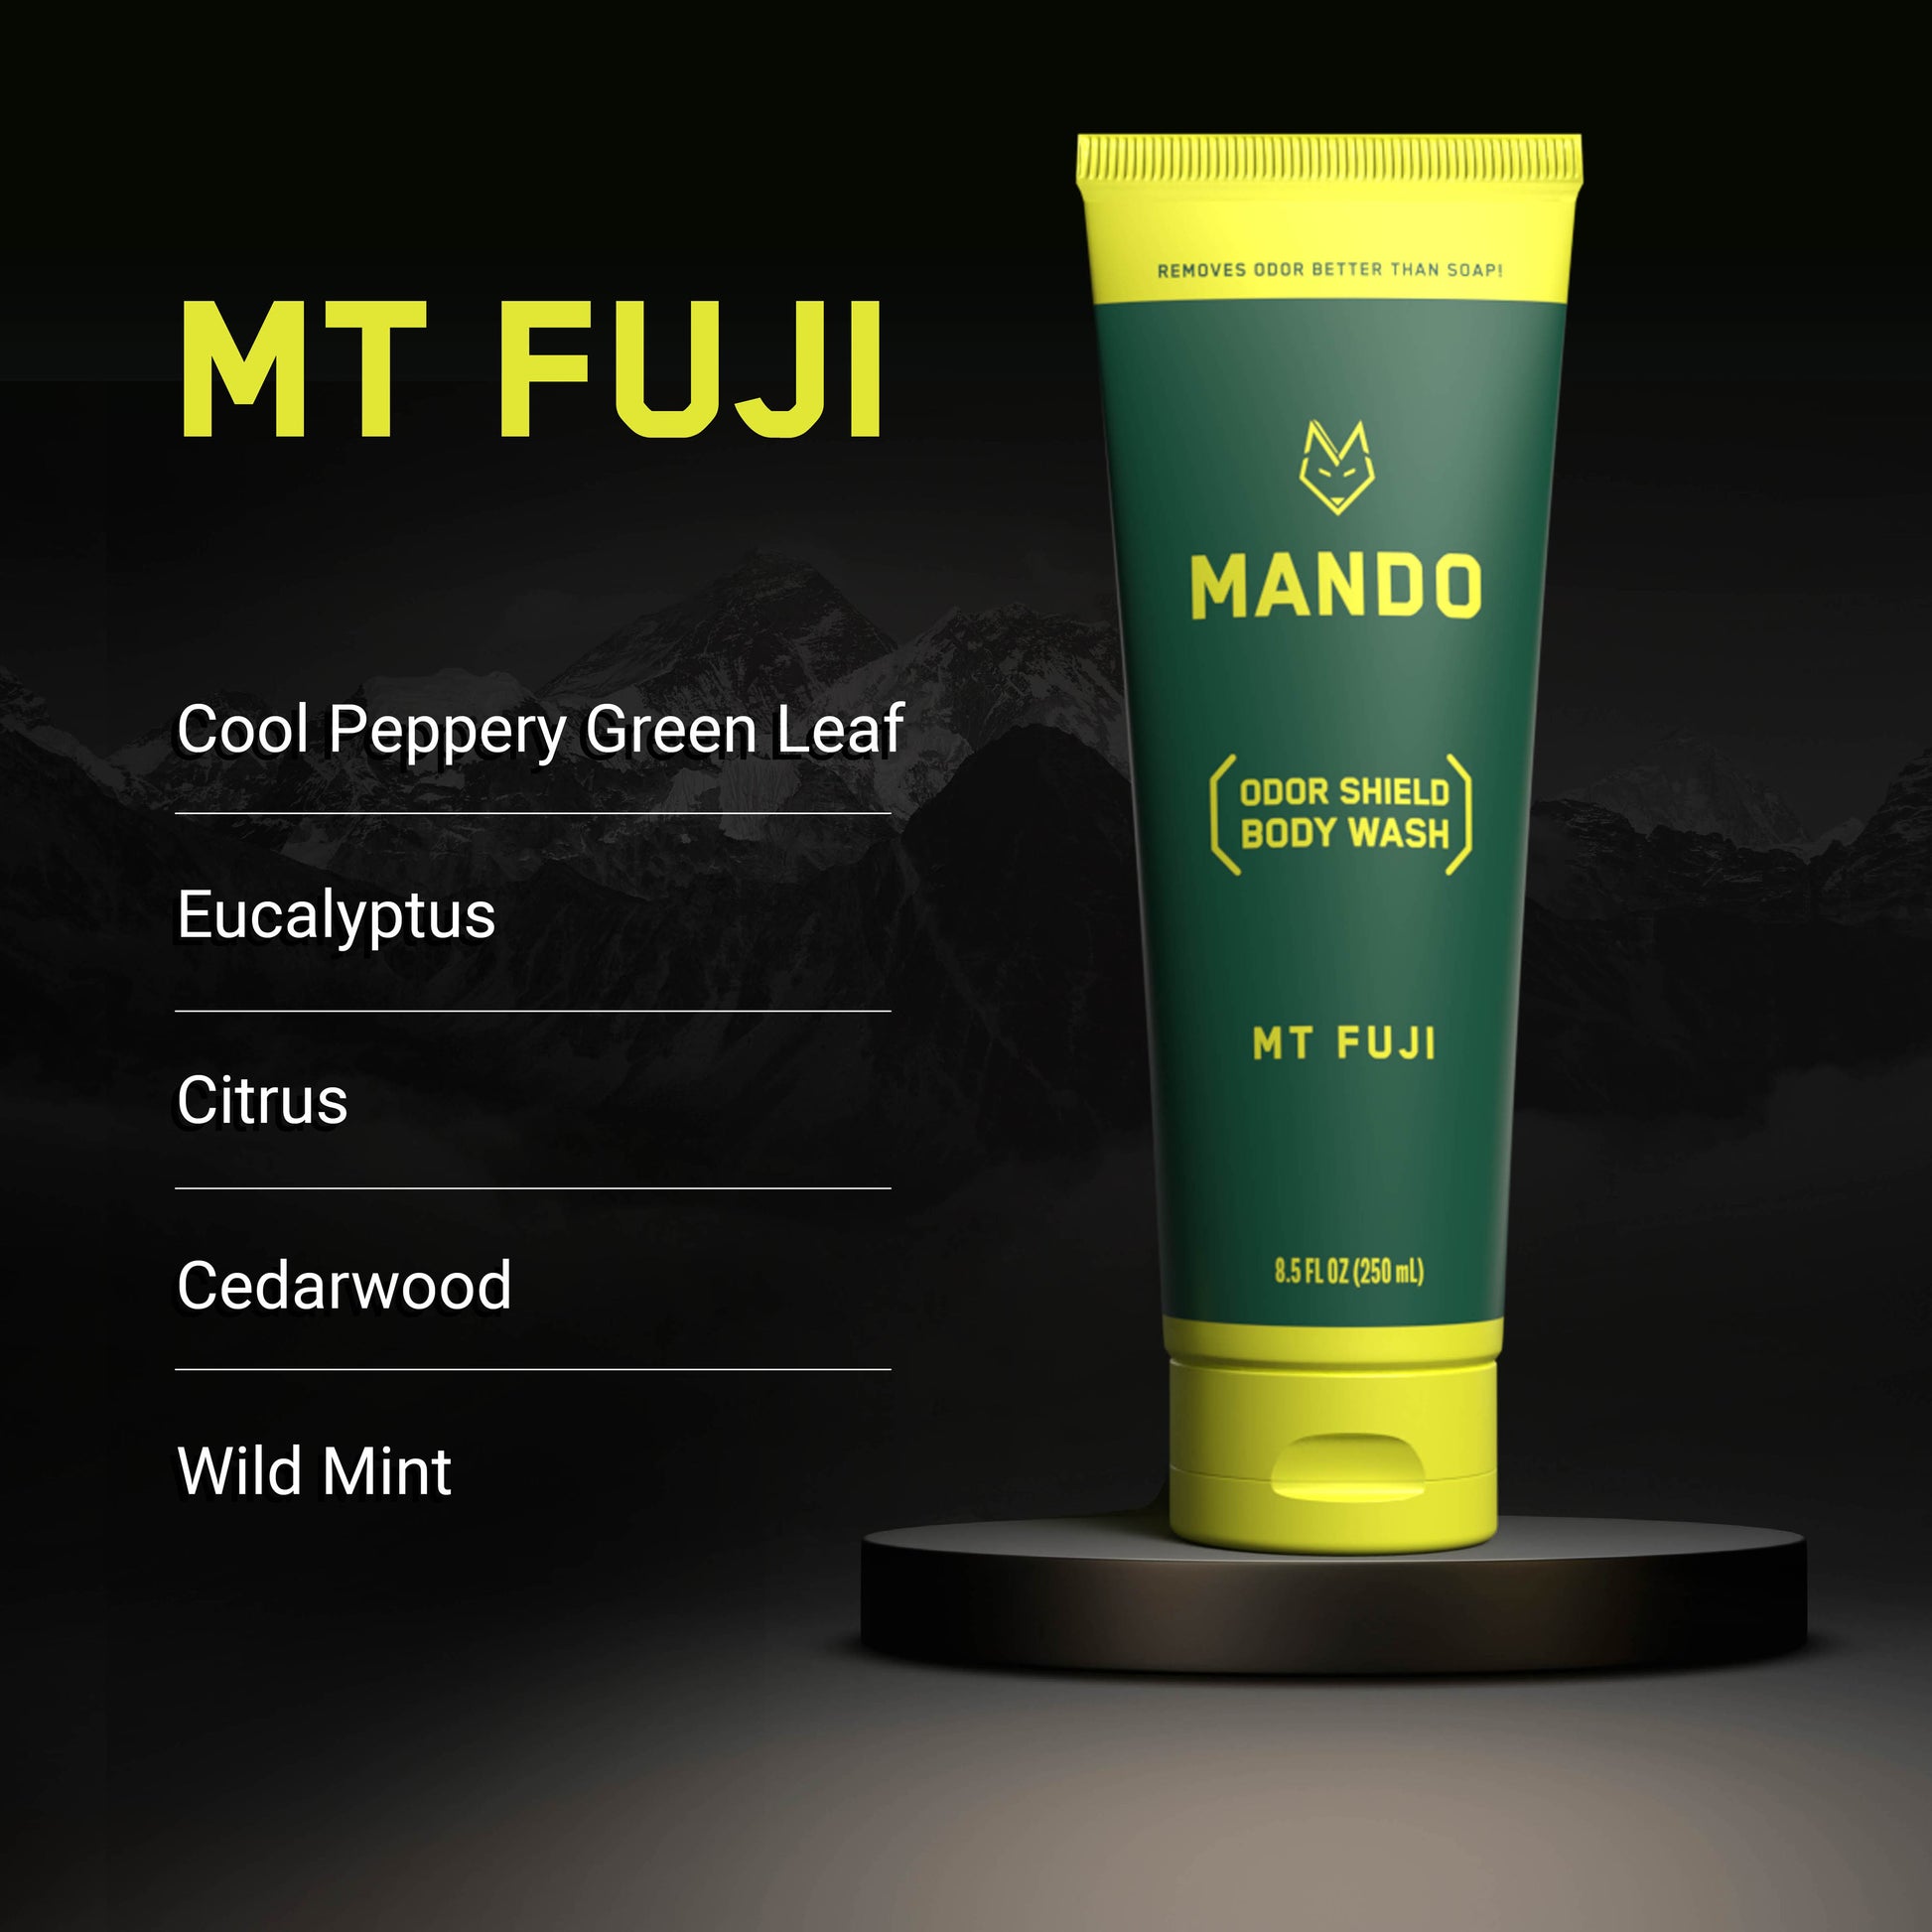 yellow green Bar of Mando body wash in Mt Fuji scent with text: cool peppery green leaf, eucalyptus, citrus, cedarwood, wild mint